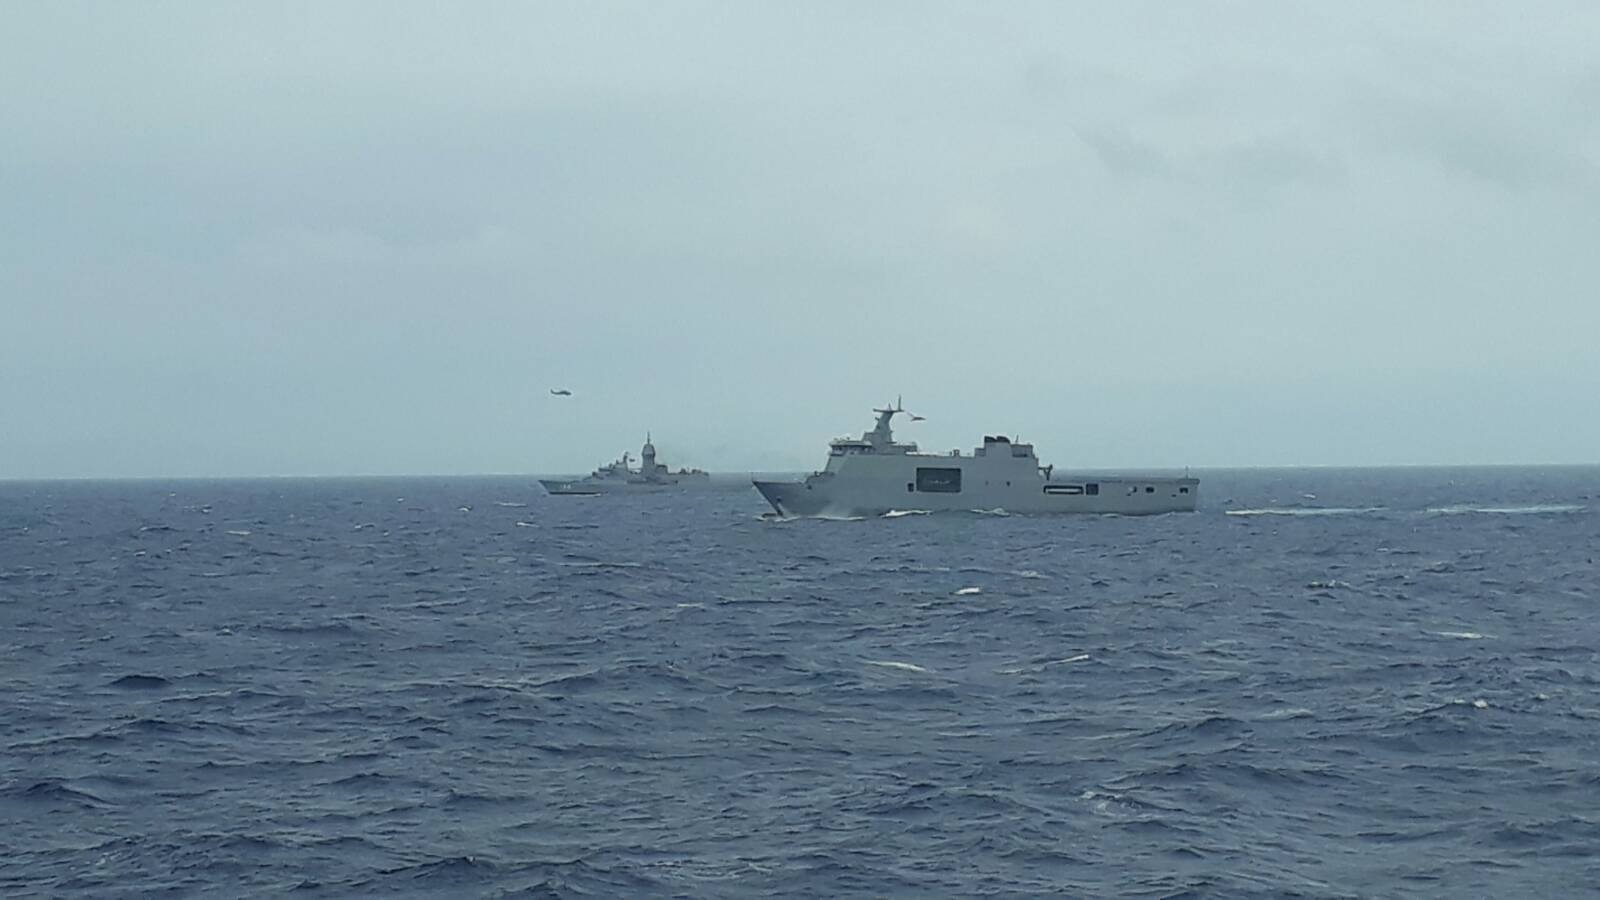 The Philippines and Australia began their first joint sea and air patrols in the South China Sea on Saturday, days after Manila took similar steps with the U.S. as Pacific nations warily eye an increasingly assertive China.